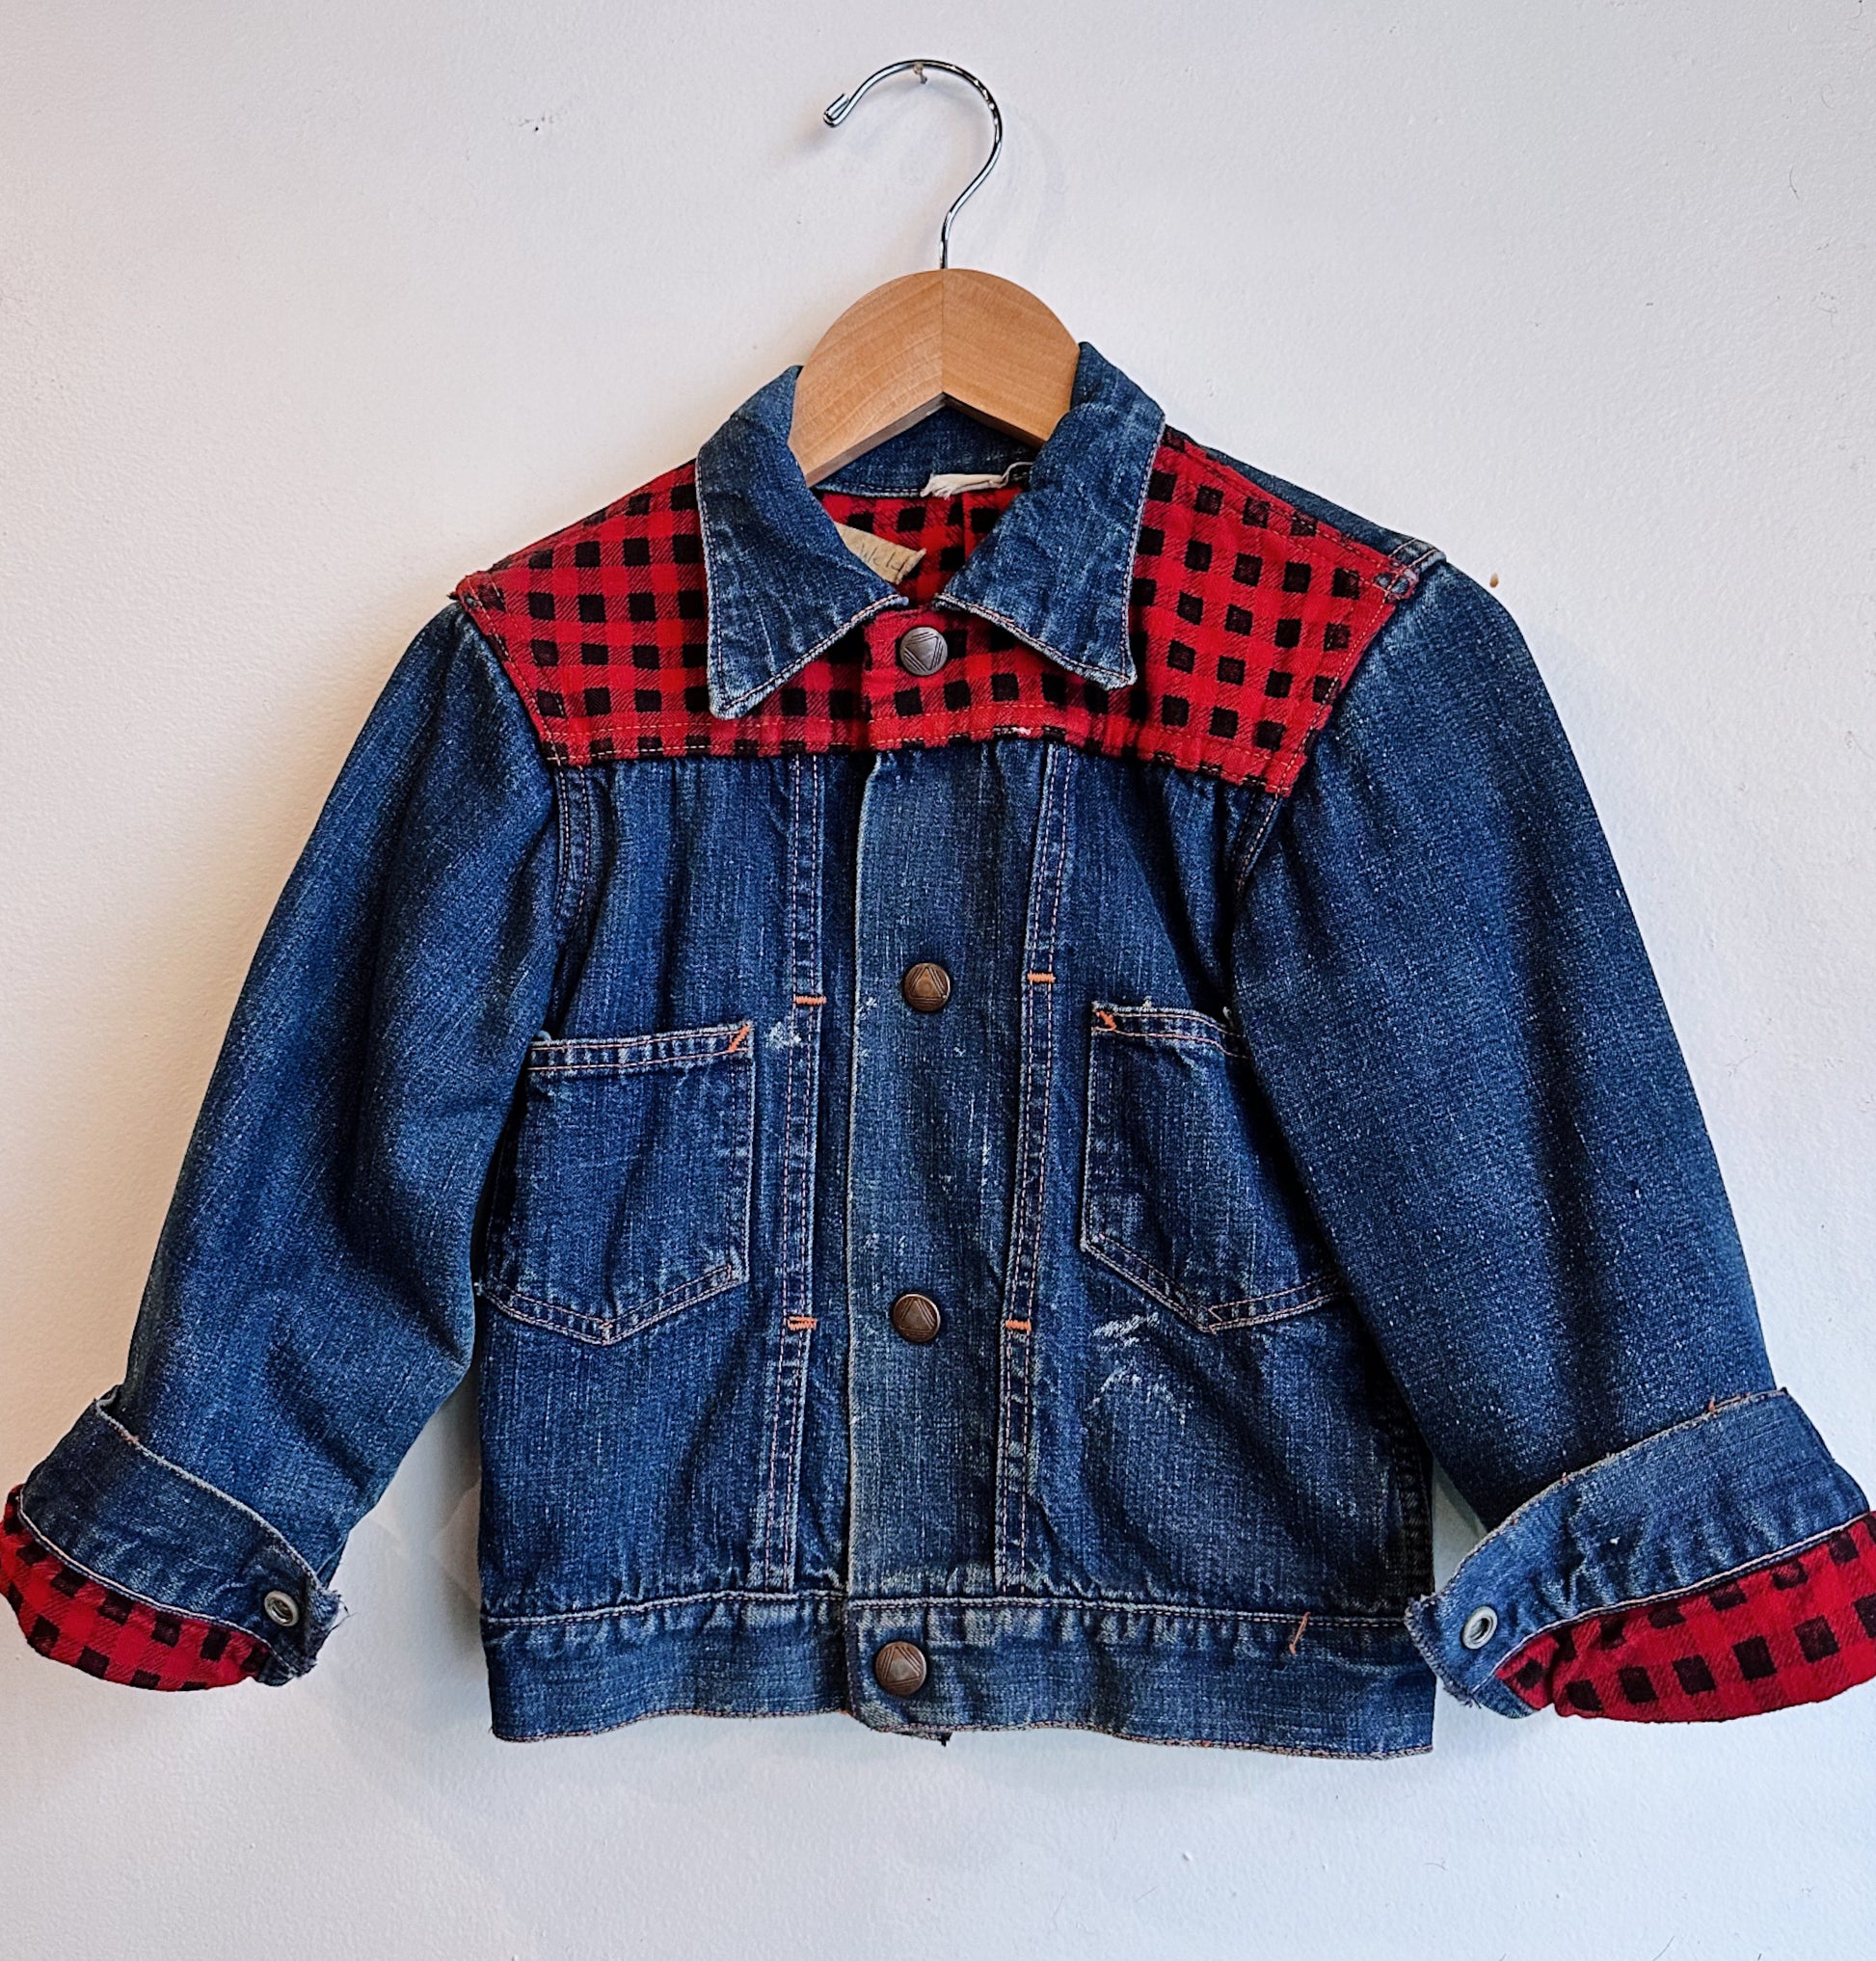 kids denim jacket from the 1950s 